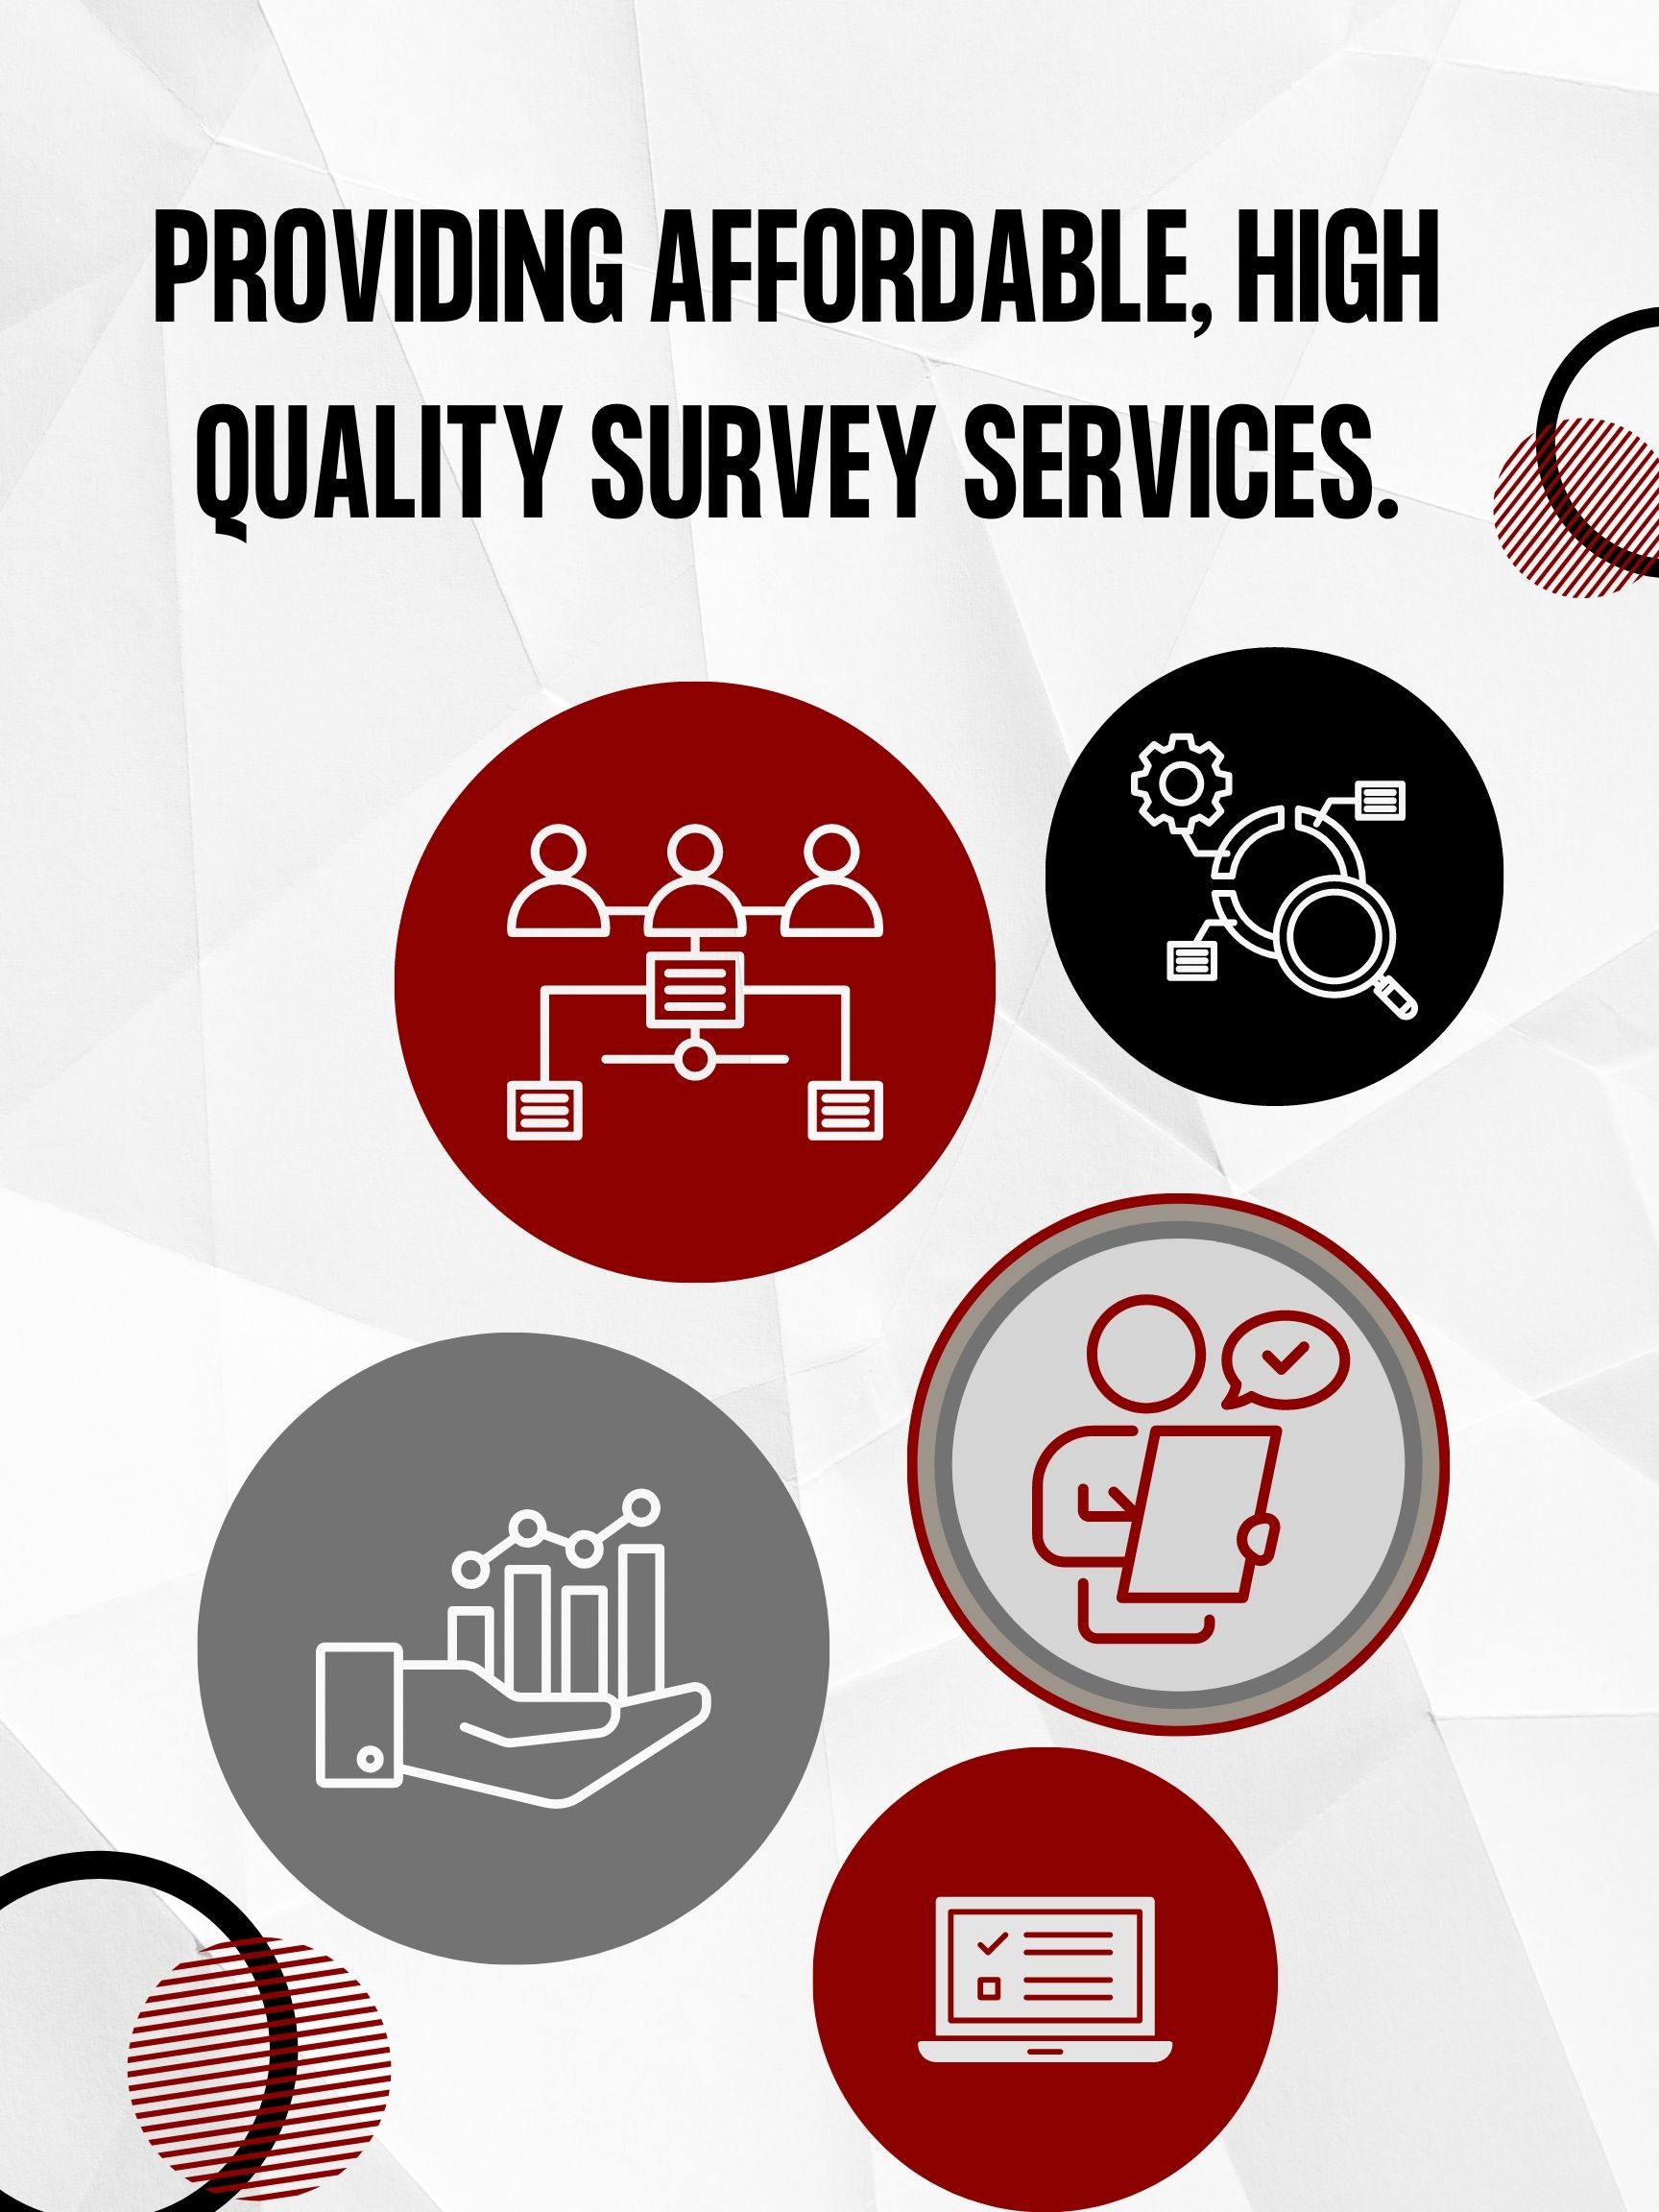 Affordable, high quality survey services